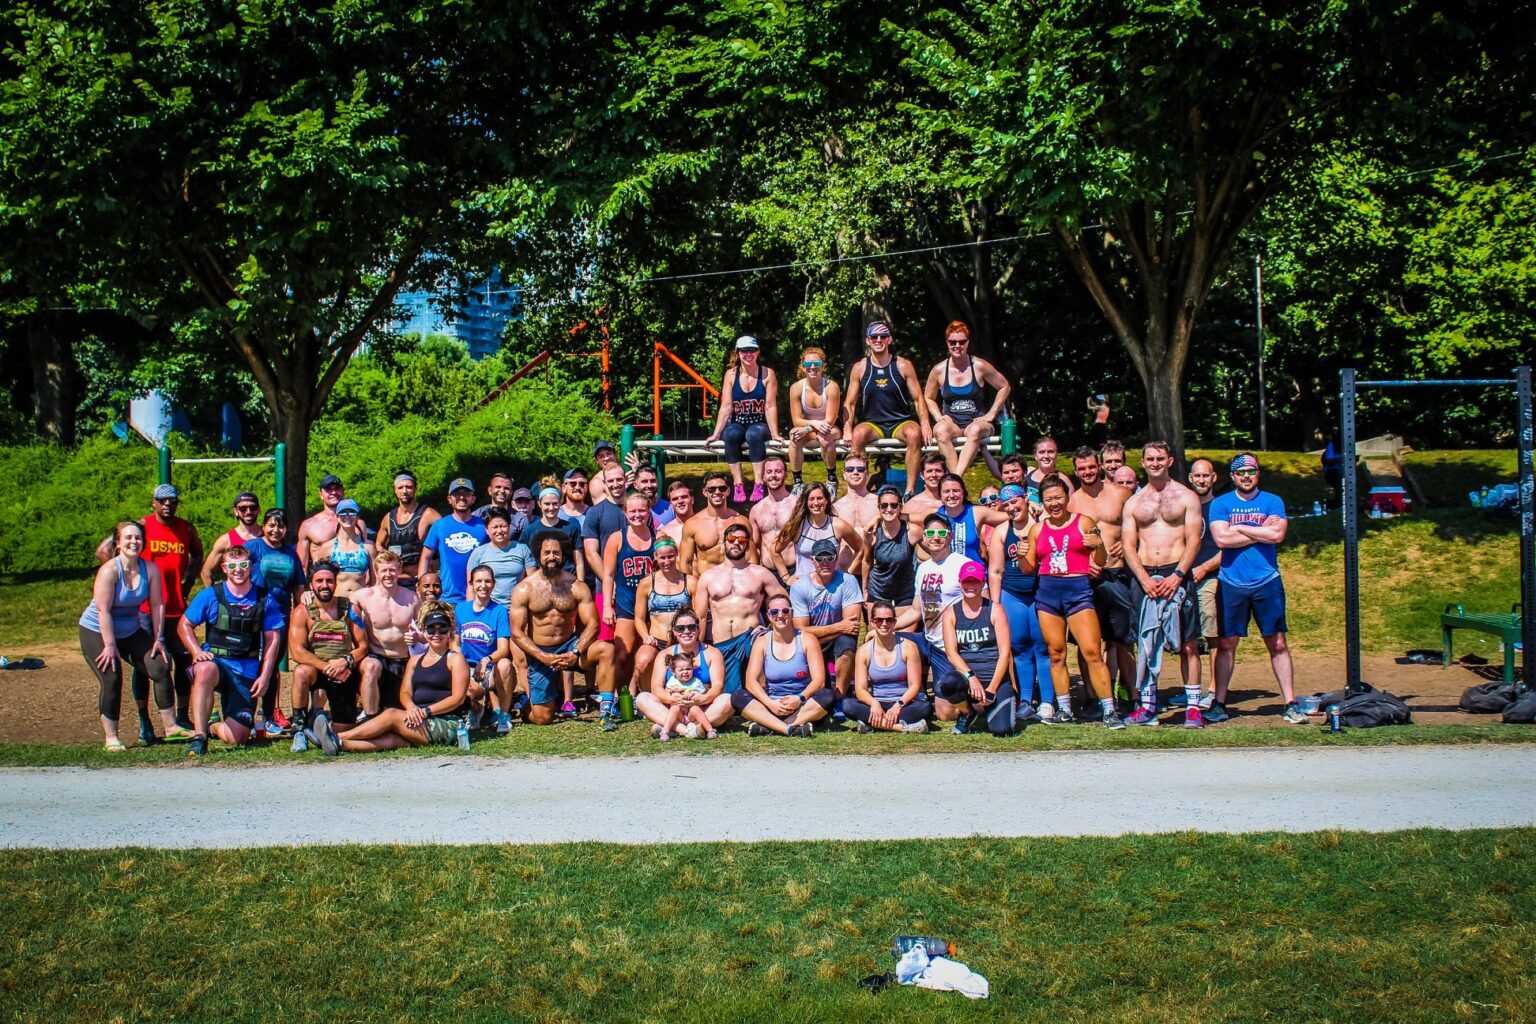 Group photo after murph at the park